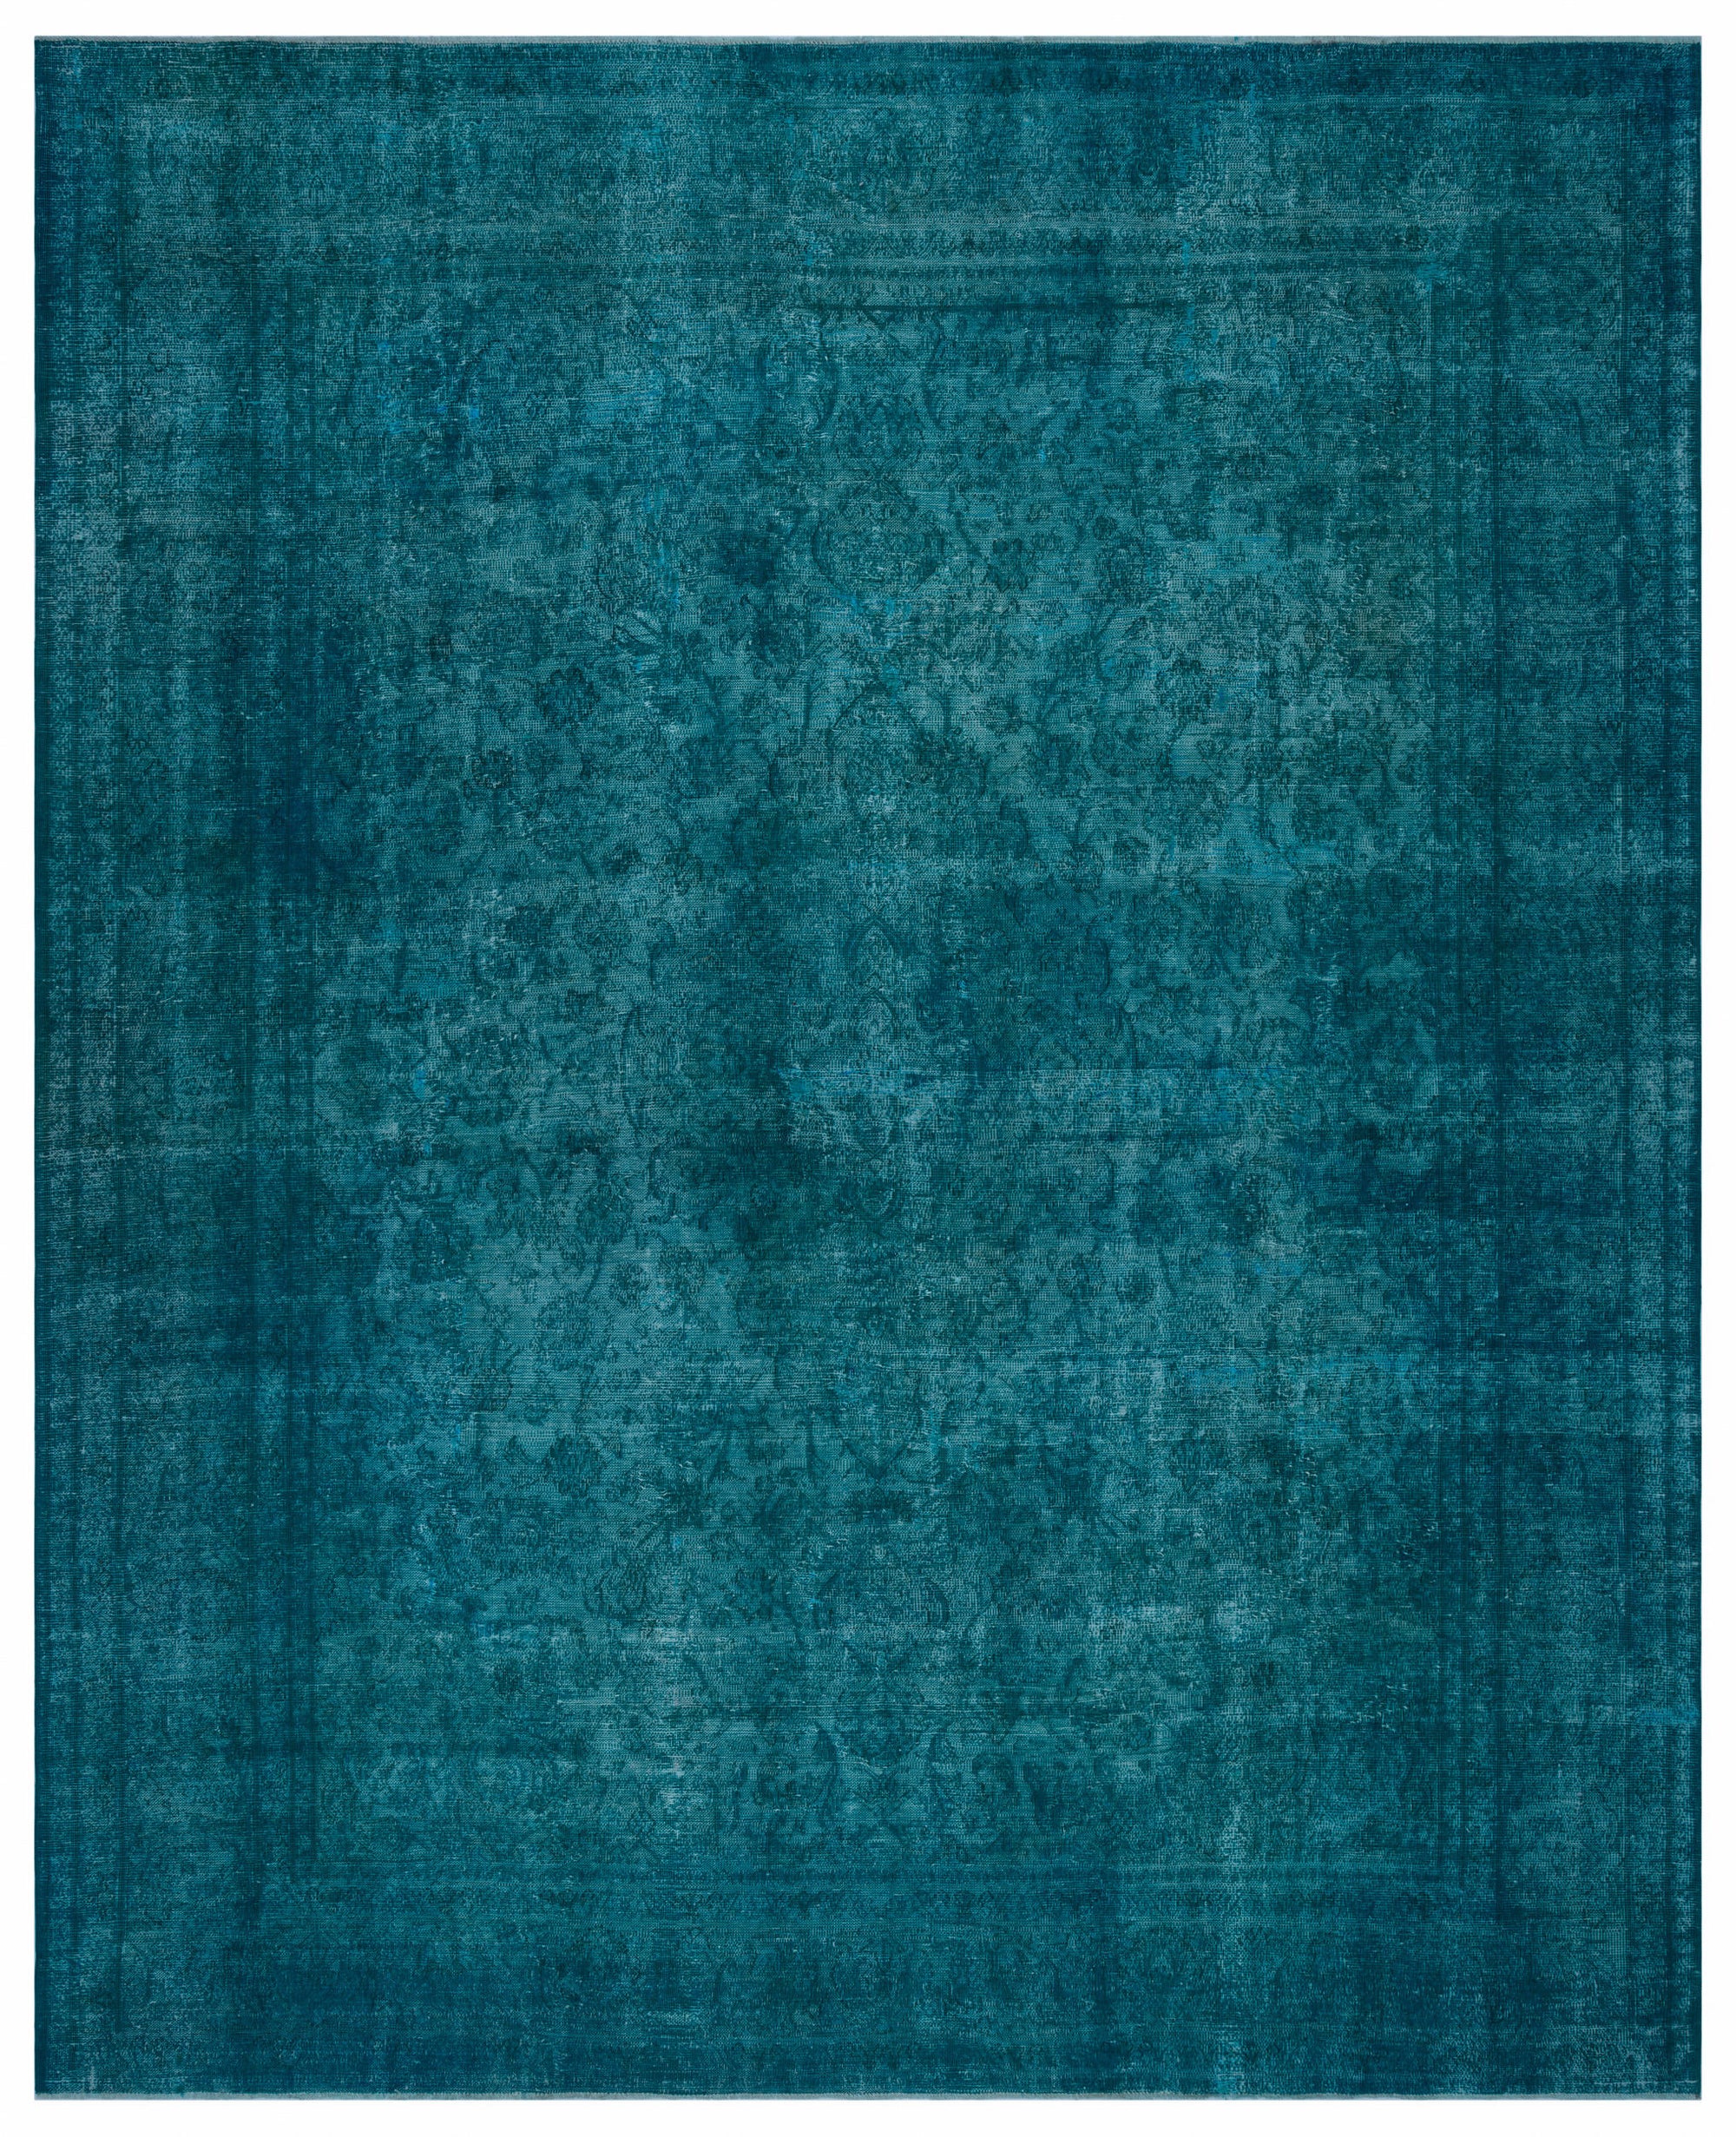 Turquoise  Over Dyed Vintage XLarge Rug 9'10'' x 12'2'' ft 300 x 372 cm